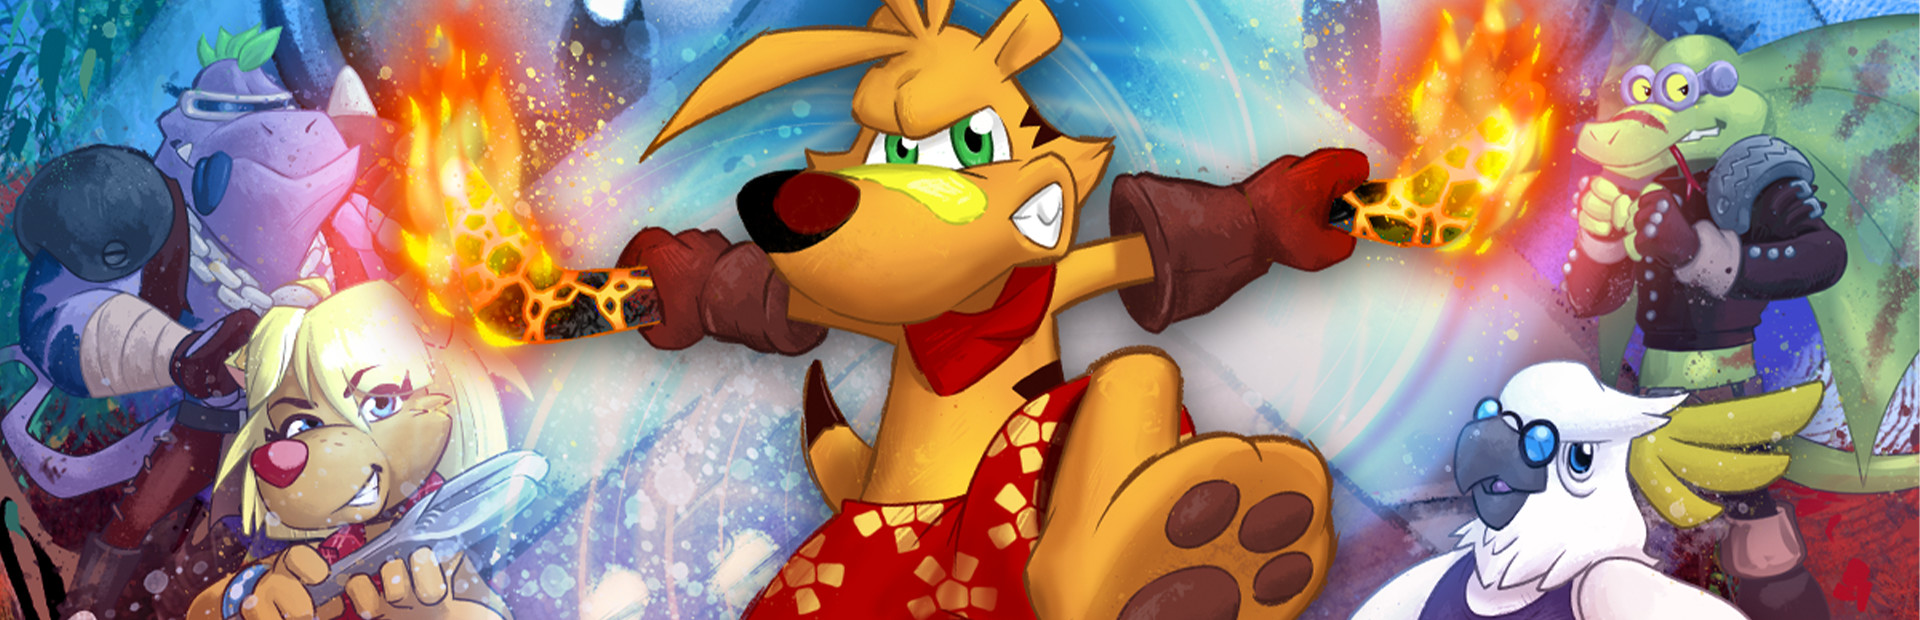 TY the Tasmanian Tiger cover image